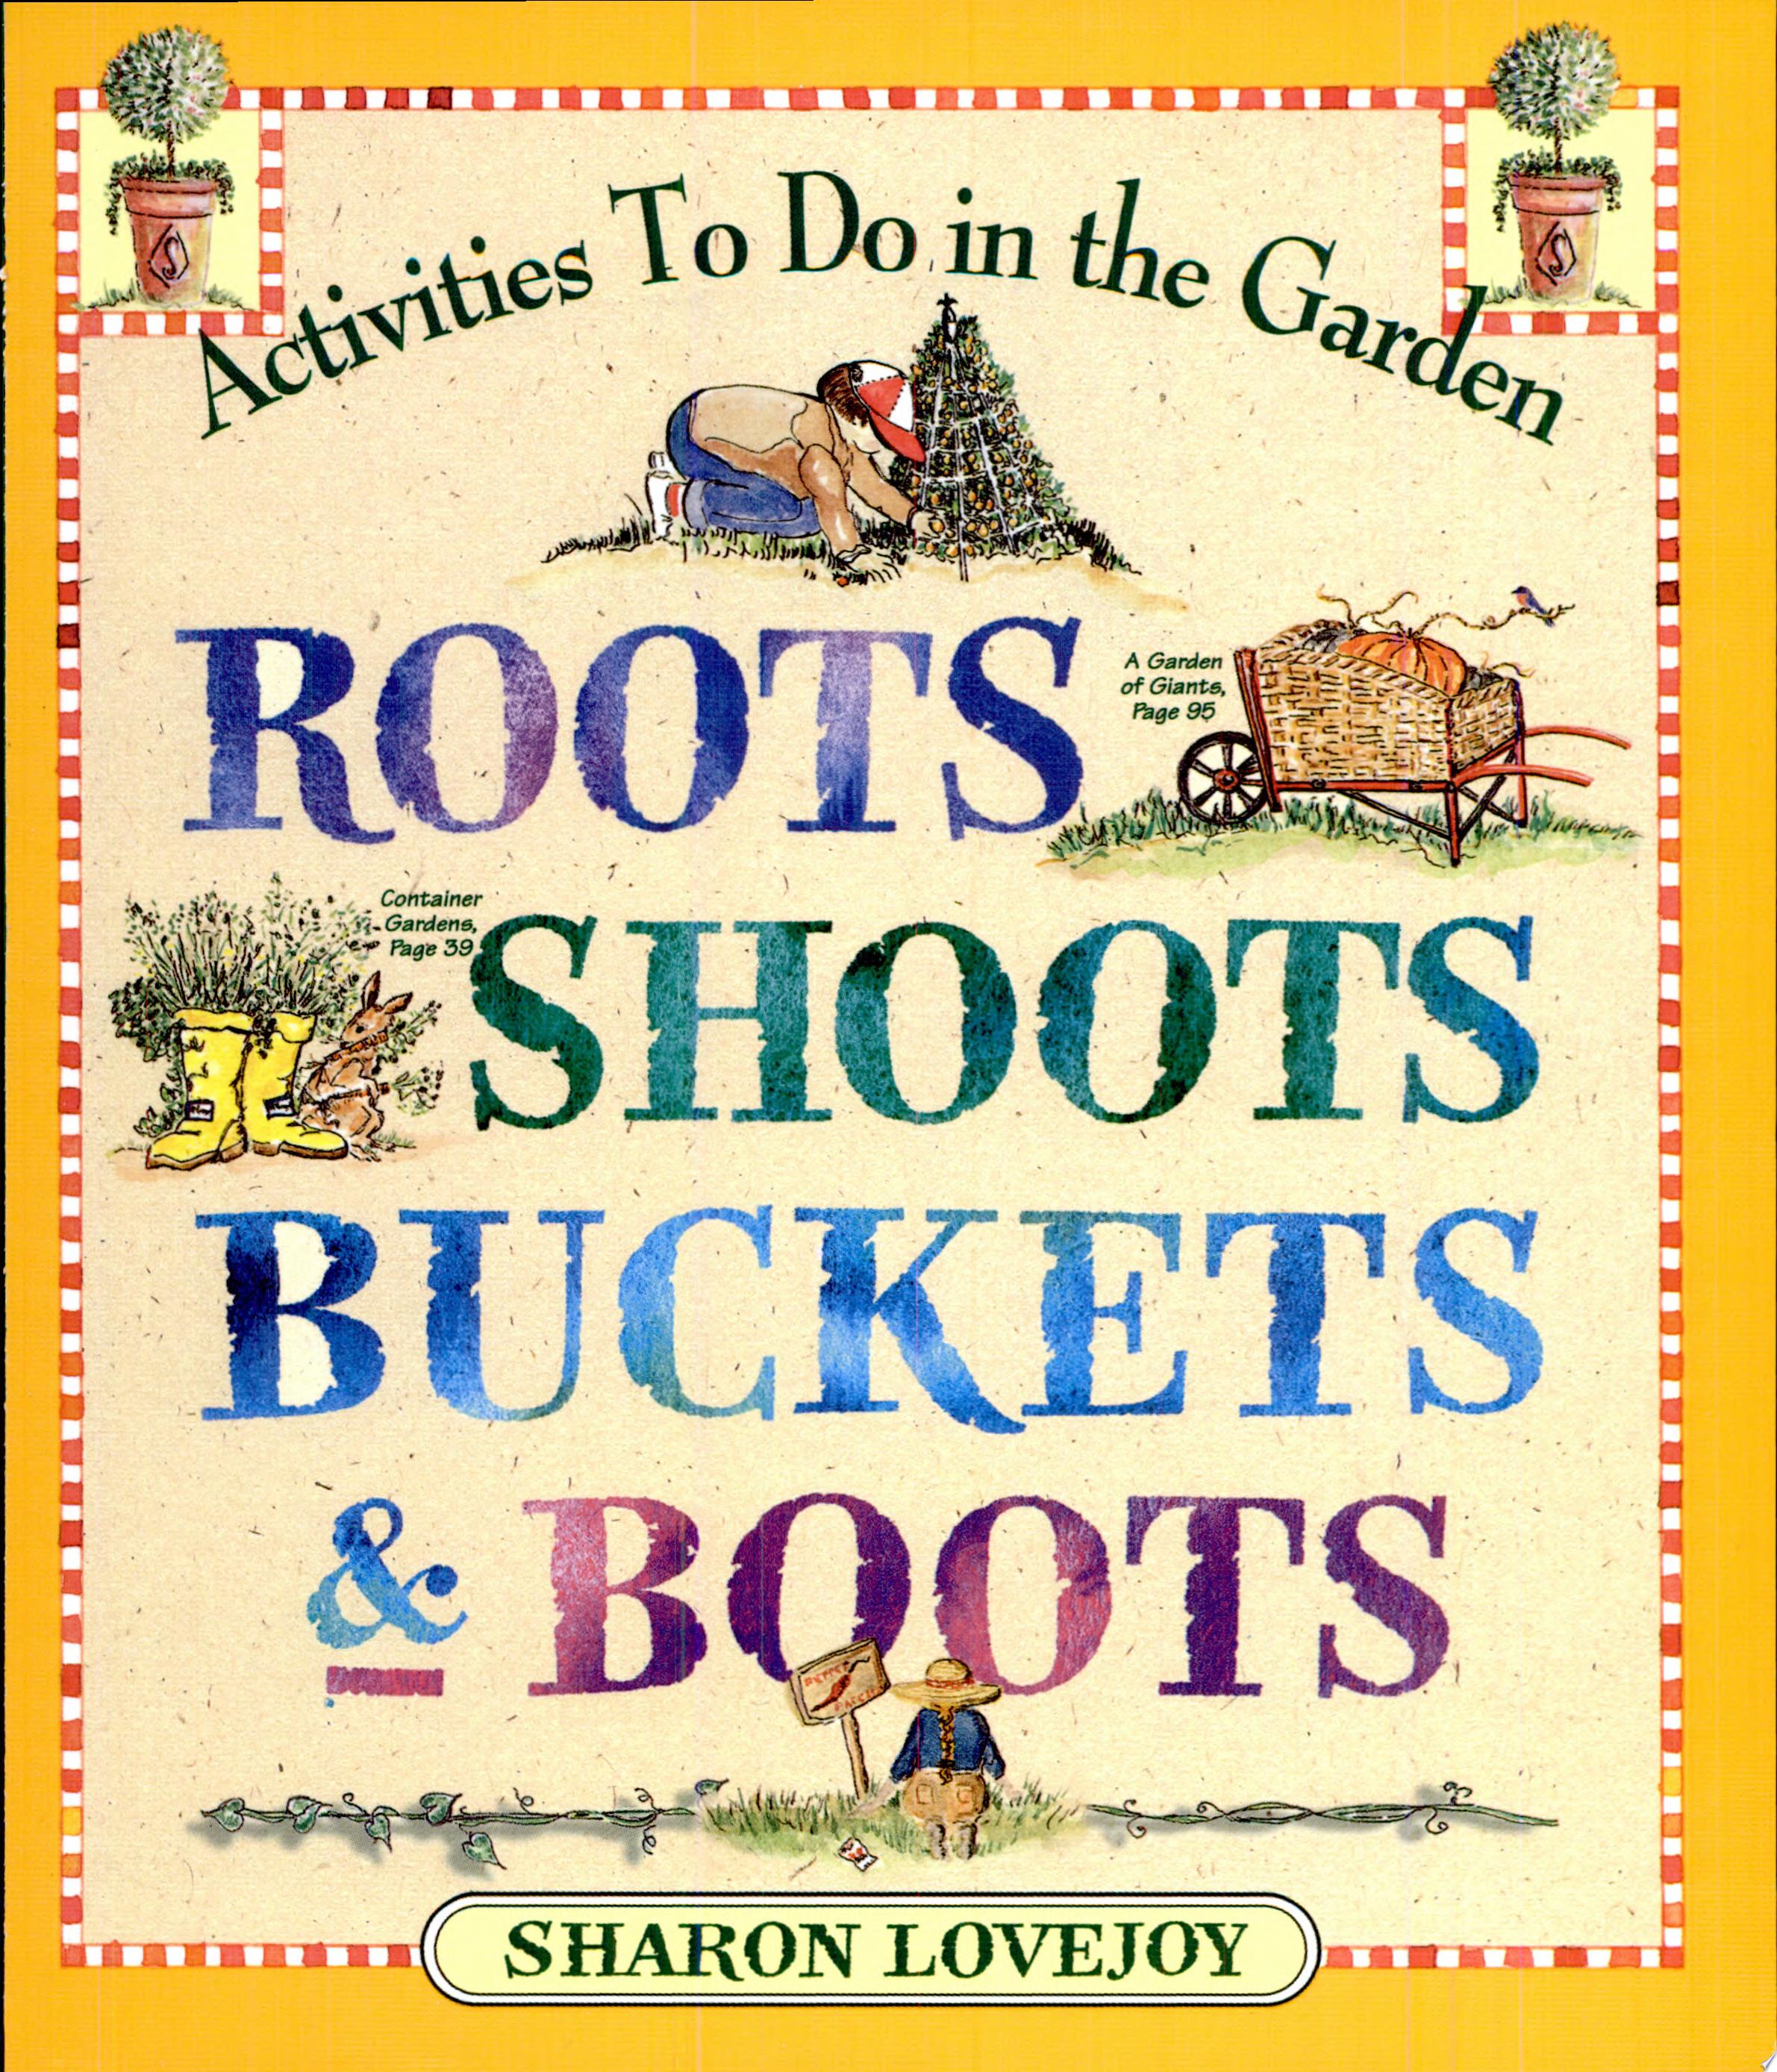 Image for "Roots, Shoots, Buckets & Boots"